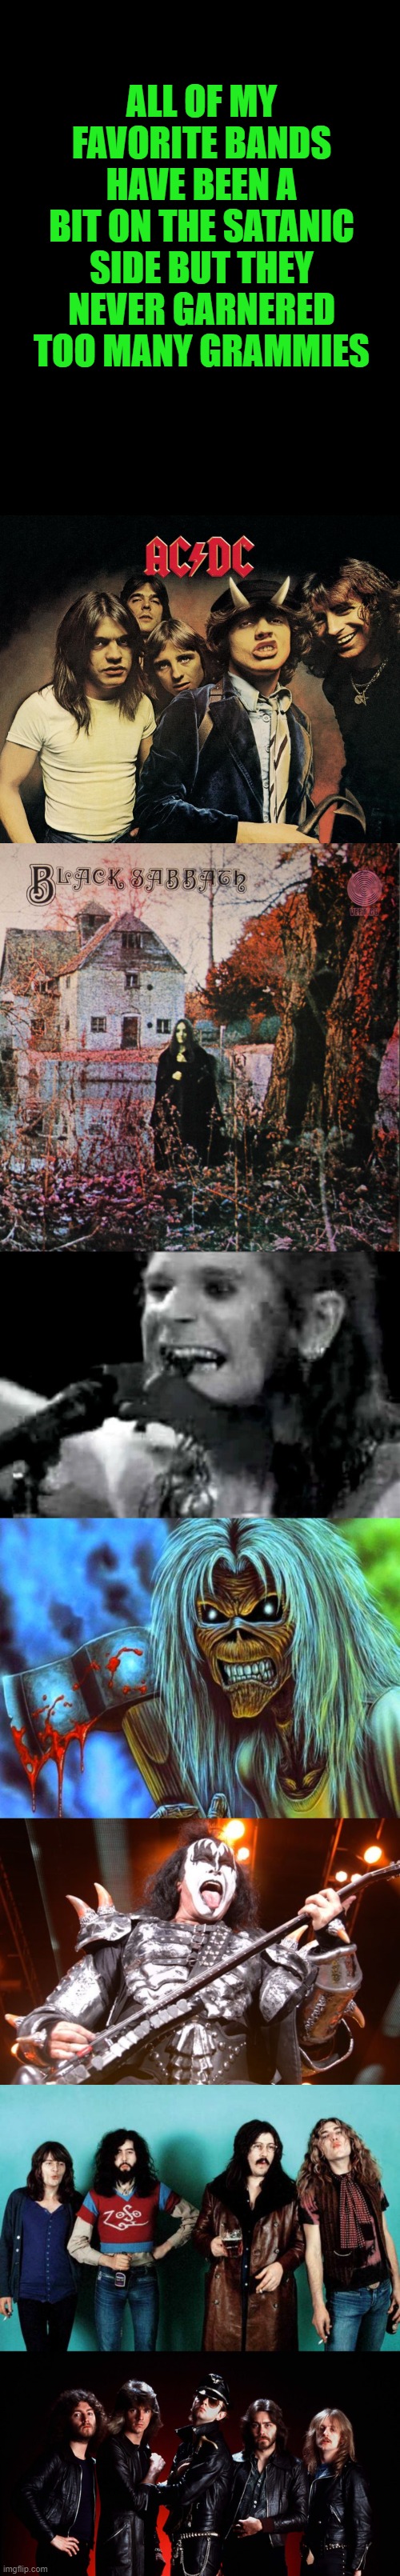 ALL OF MY FAVORITE BANDS HAVE BEEN A BIT ON THE SATANIC SIDE BUT THEY NEVER GARNERED TOO MANY GRAMMIES | image tagged in acdc,black sabbath,ozzy biting bat,iron maiden eddie,kiss bassist,led zeppelin | made w/ Imgflip meme maker